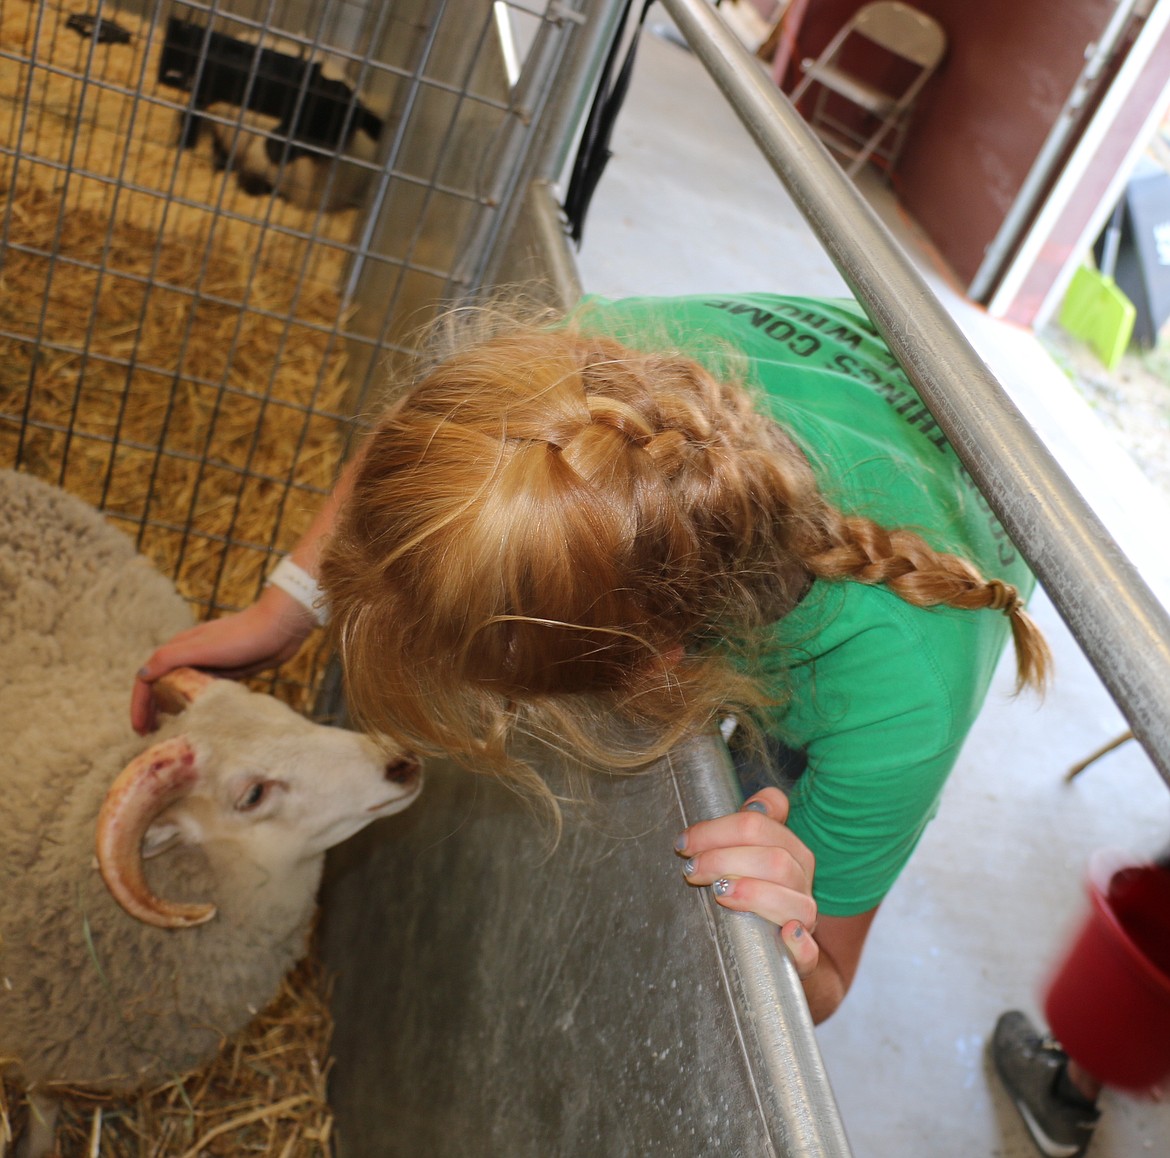 A fair participant reaches down to pet her goat as she takes part in the Bonner County Fair on Wednesday.